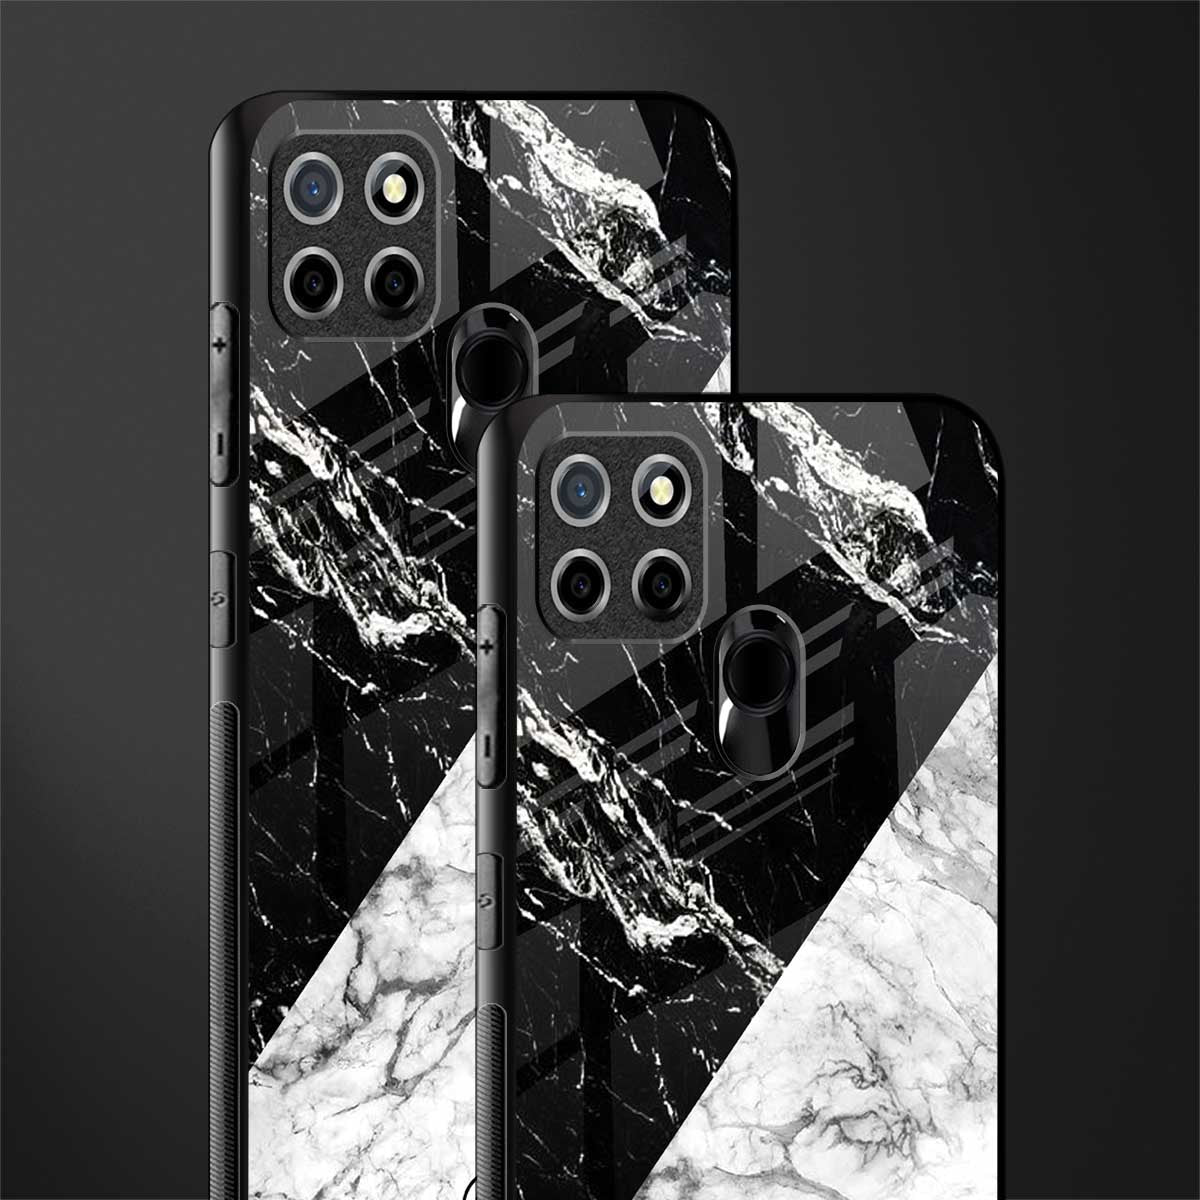 fatal contradiction phone cover for realme c12